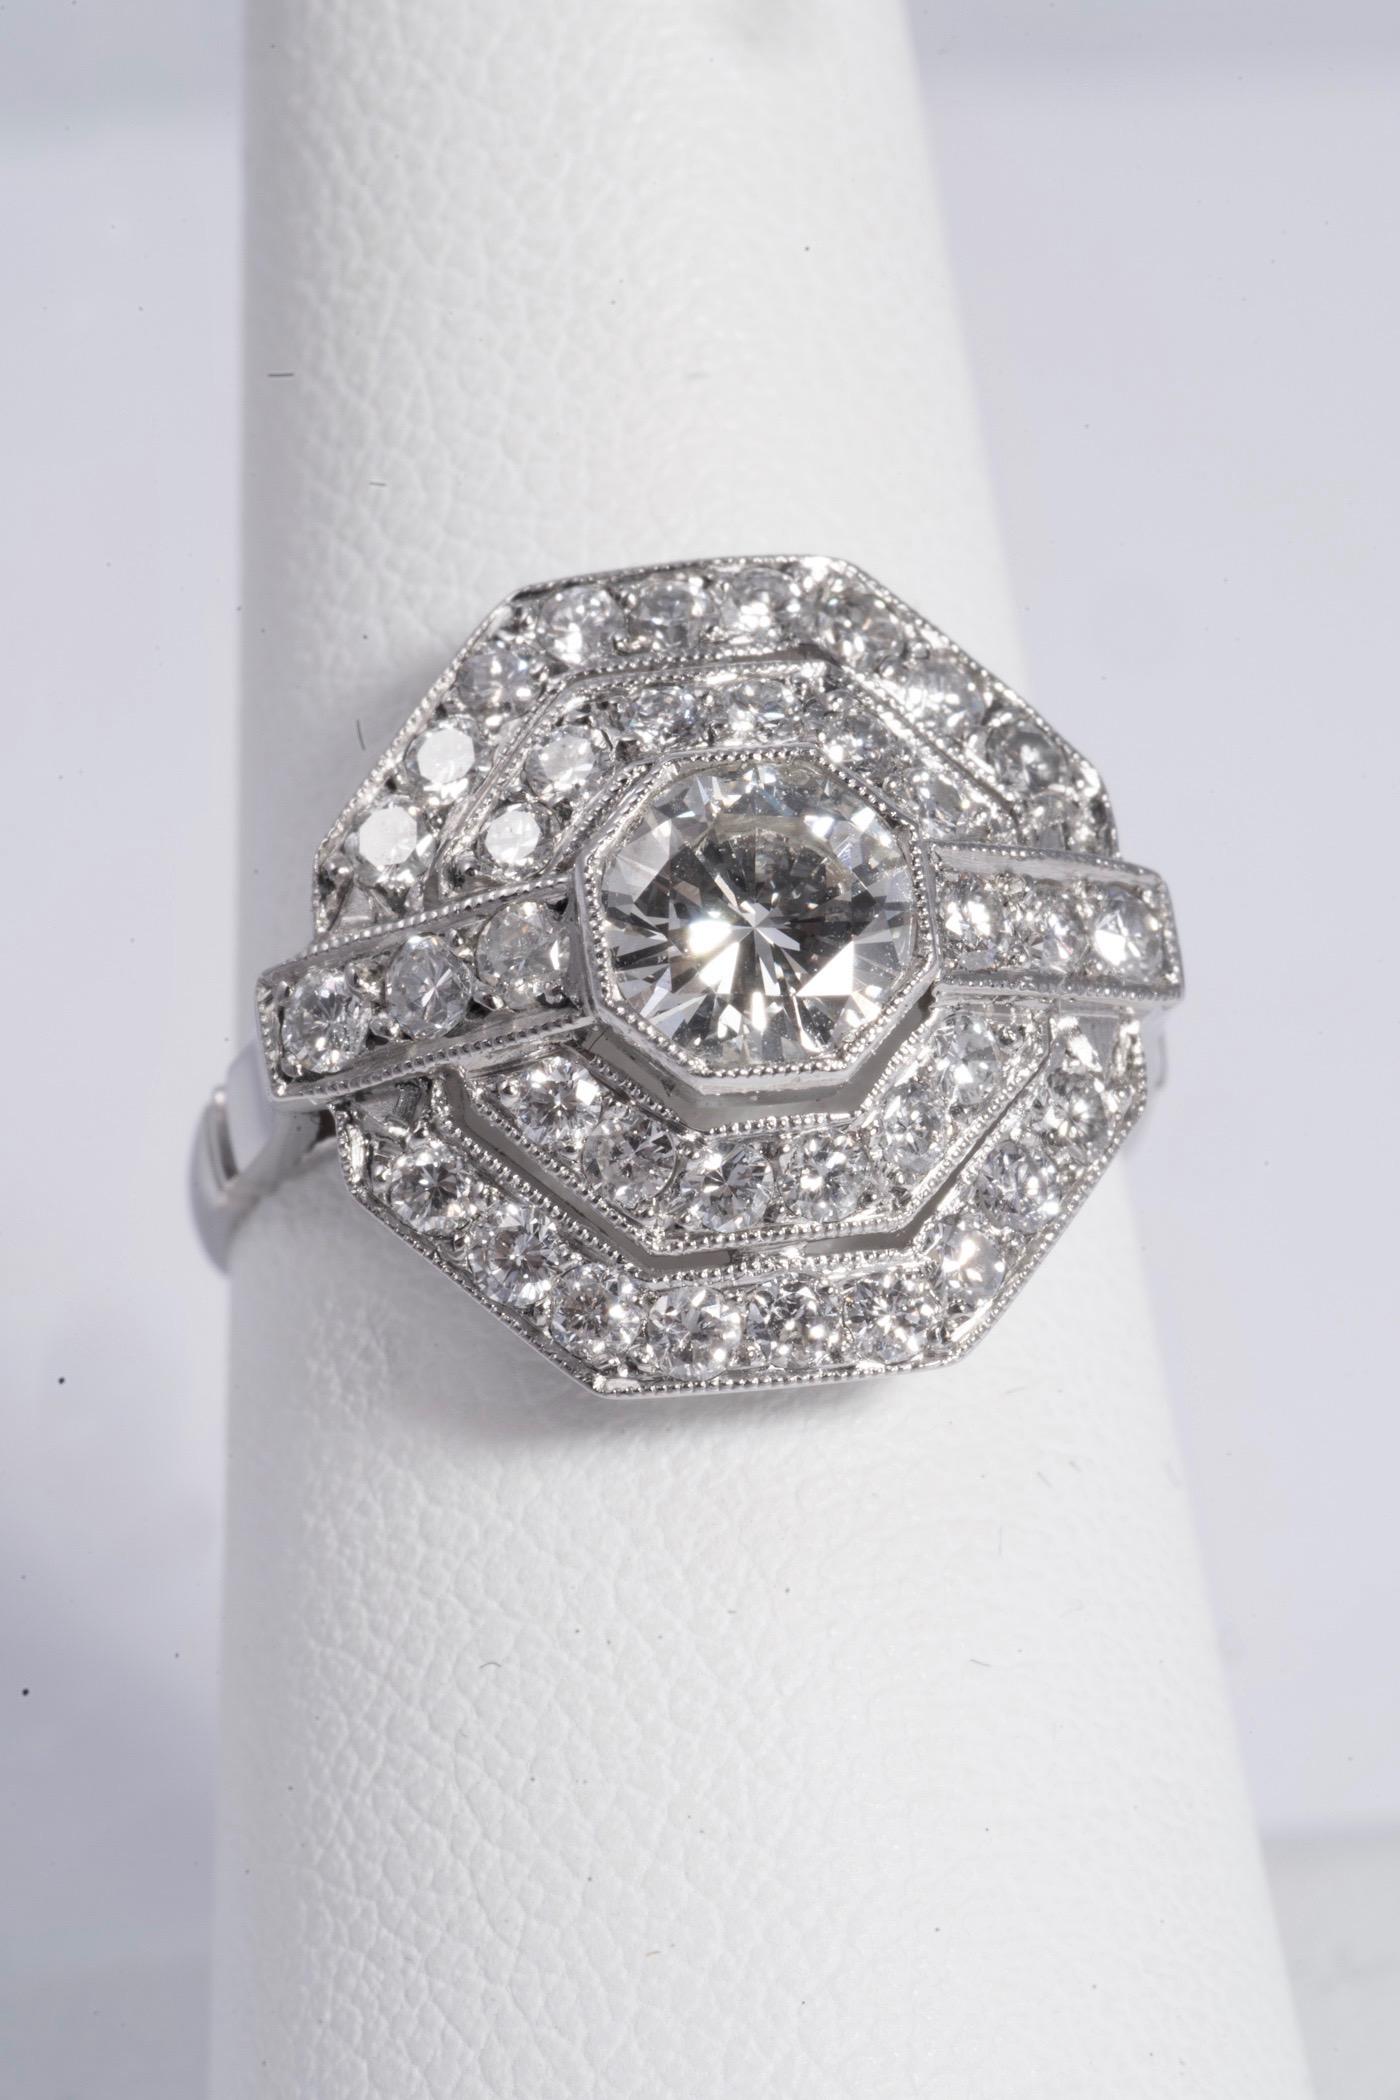 Gorgeous Art Deco Style diamond ring. The center diamond is a round brilliant cut, weighs approximately .65cts and has F-G color and VS2 Clarity. There are 36 round brilliant cut diamonds surrounding the center diamond. They each weigh approximately